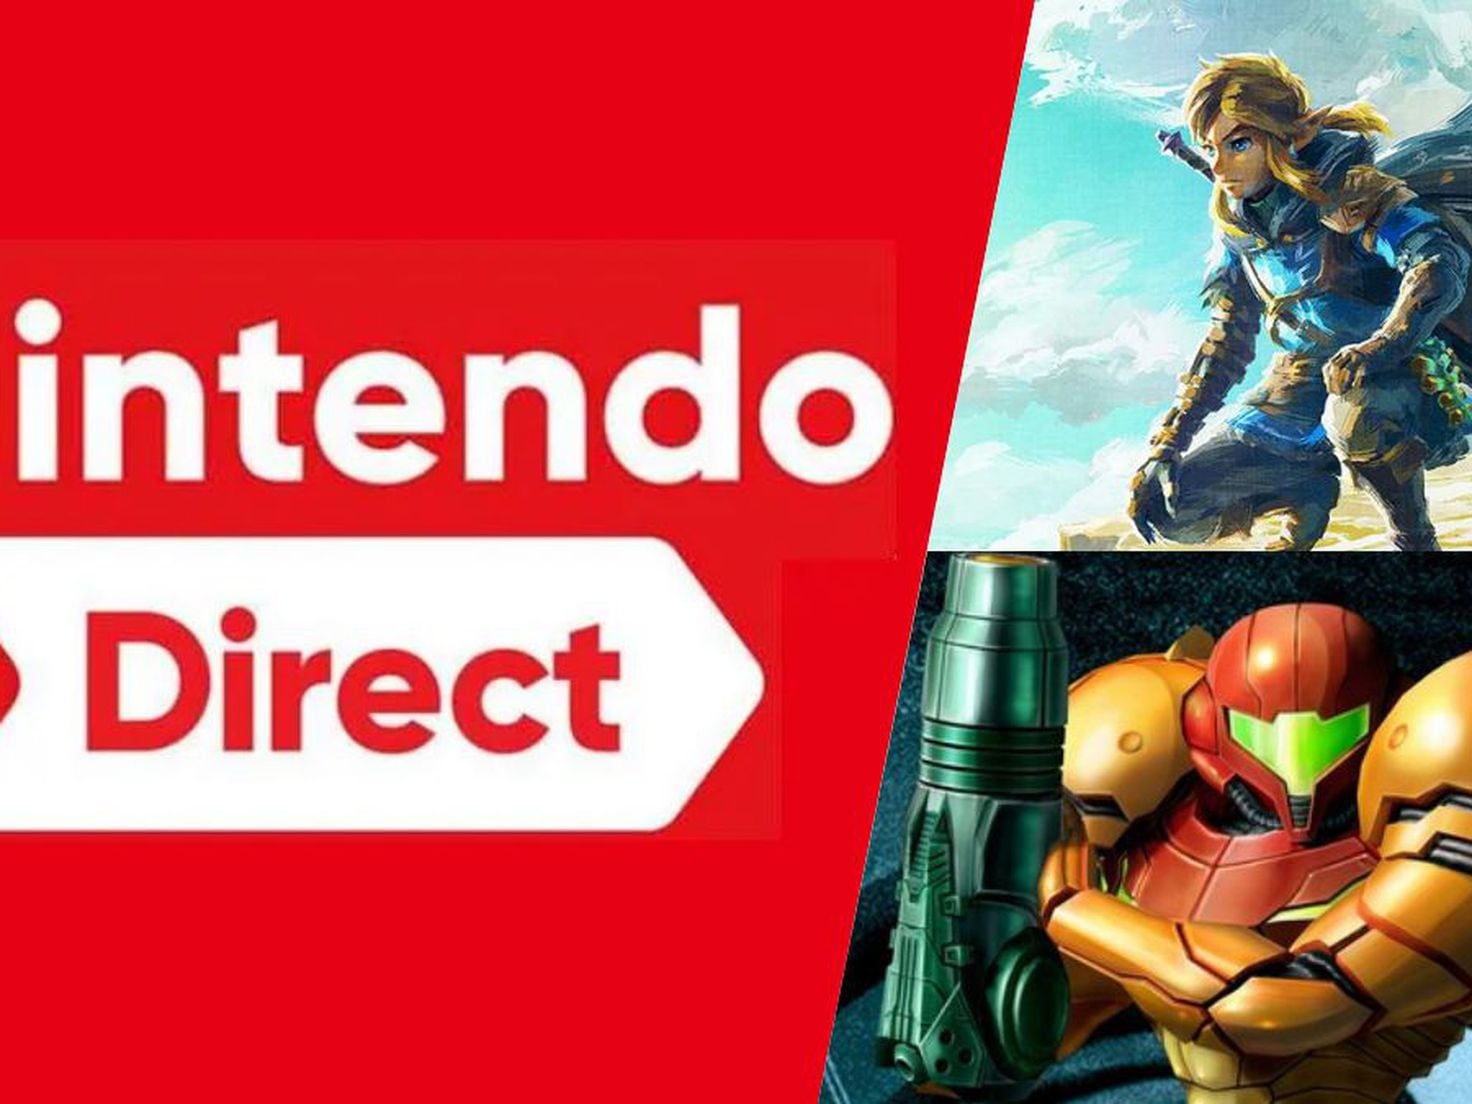 Where to Pre-Order the Games Announced During the Nintendo Direct - IGN